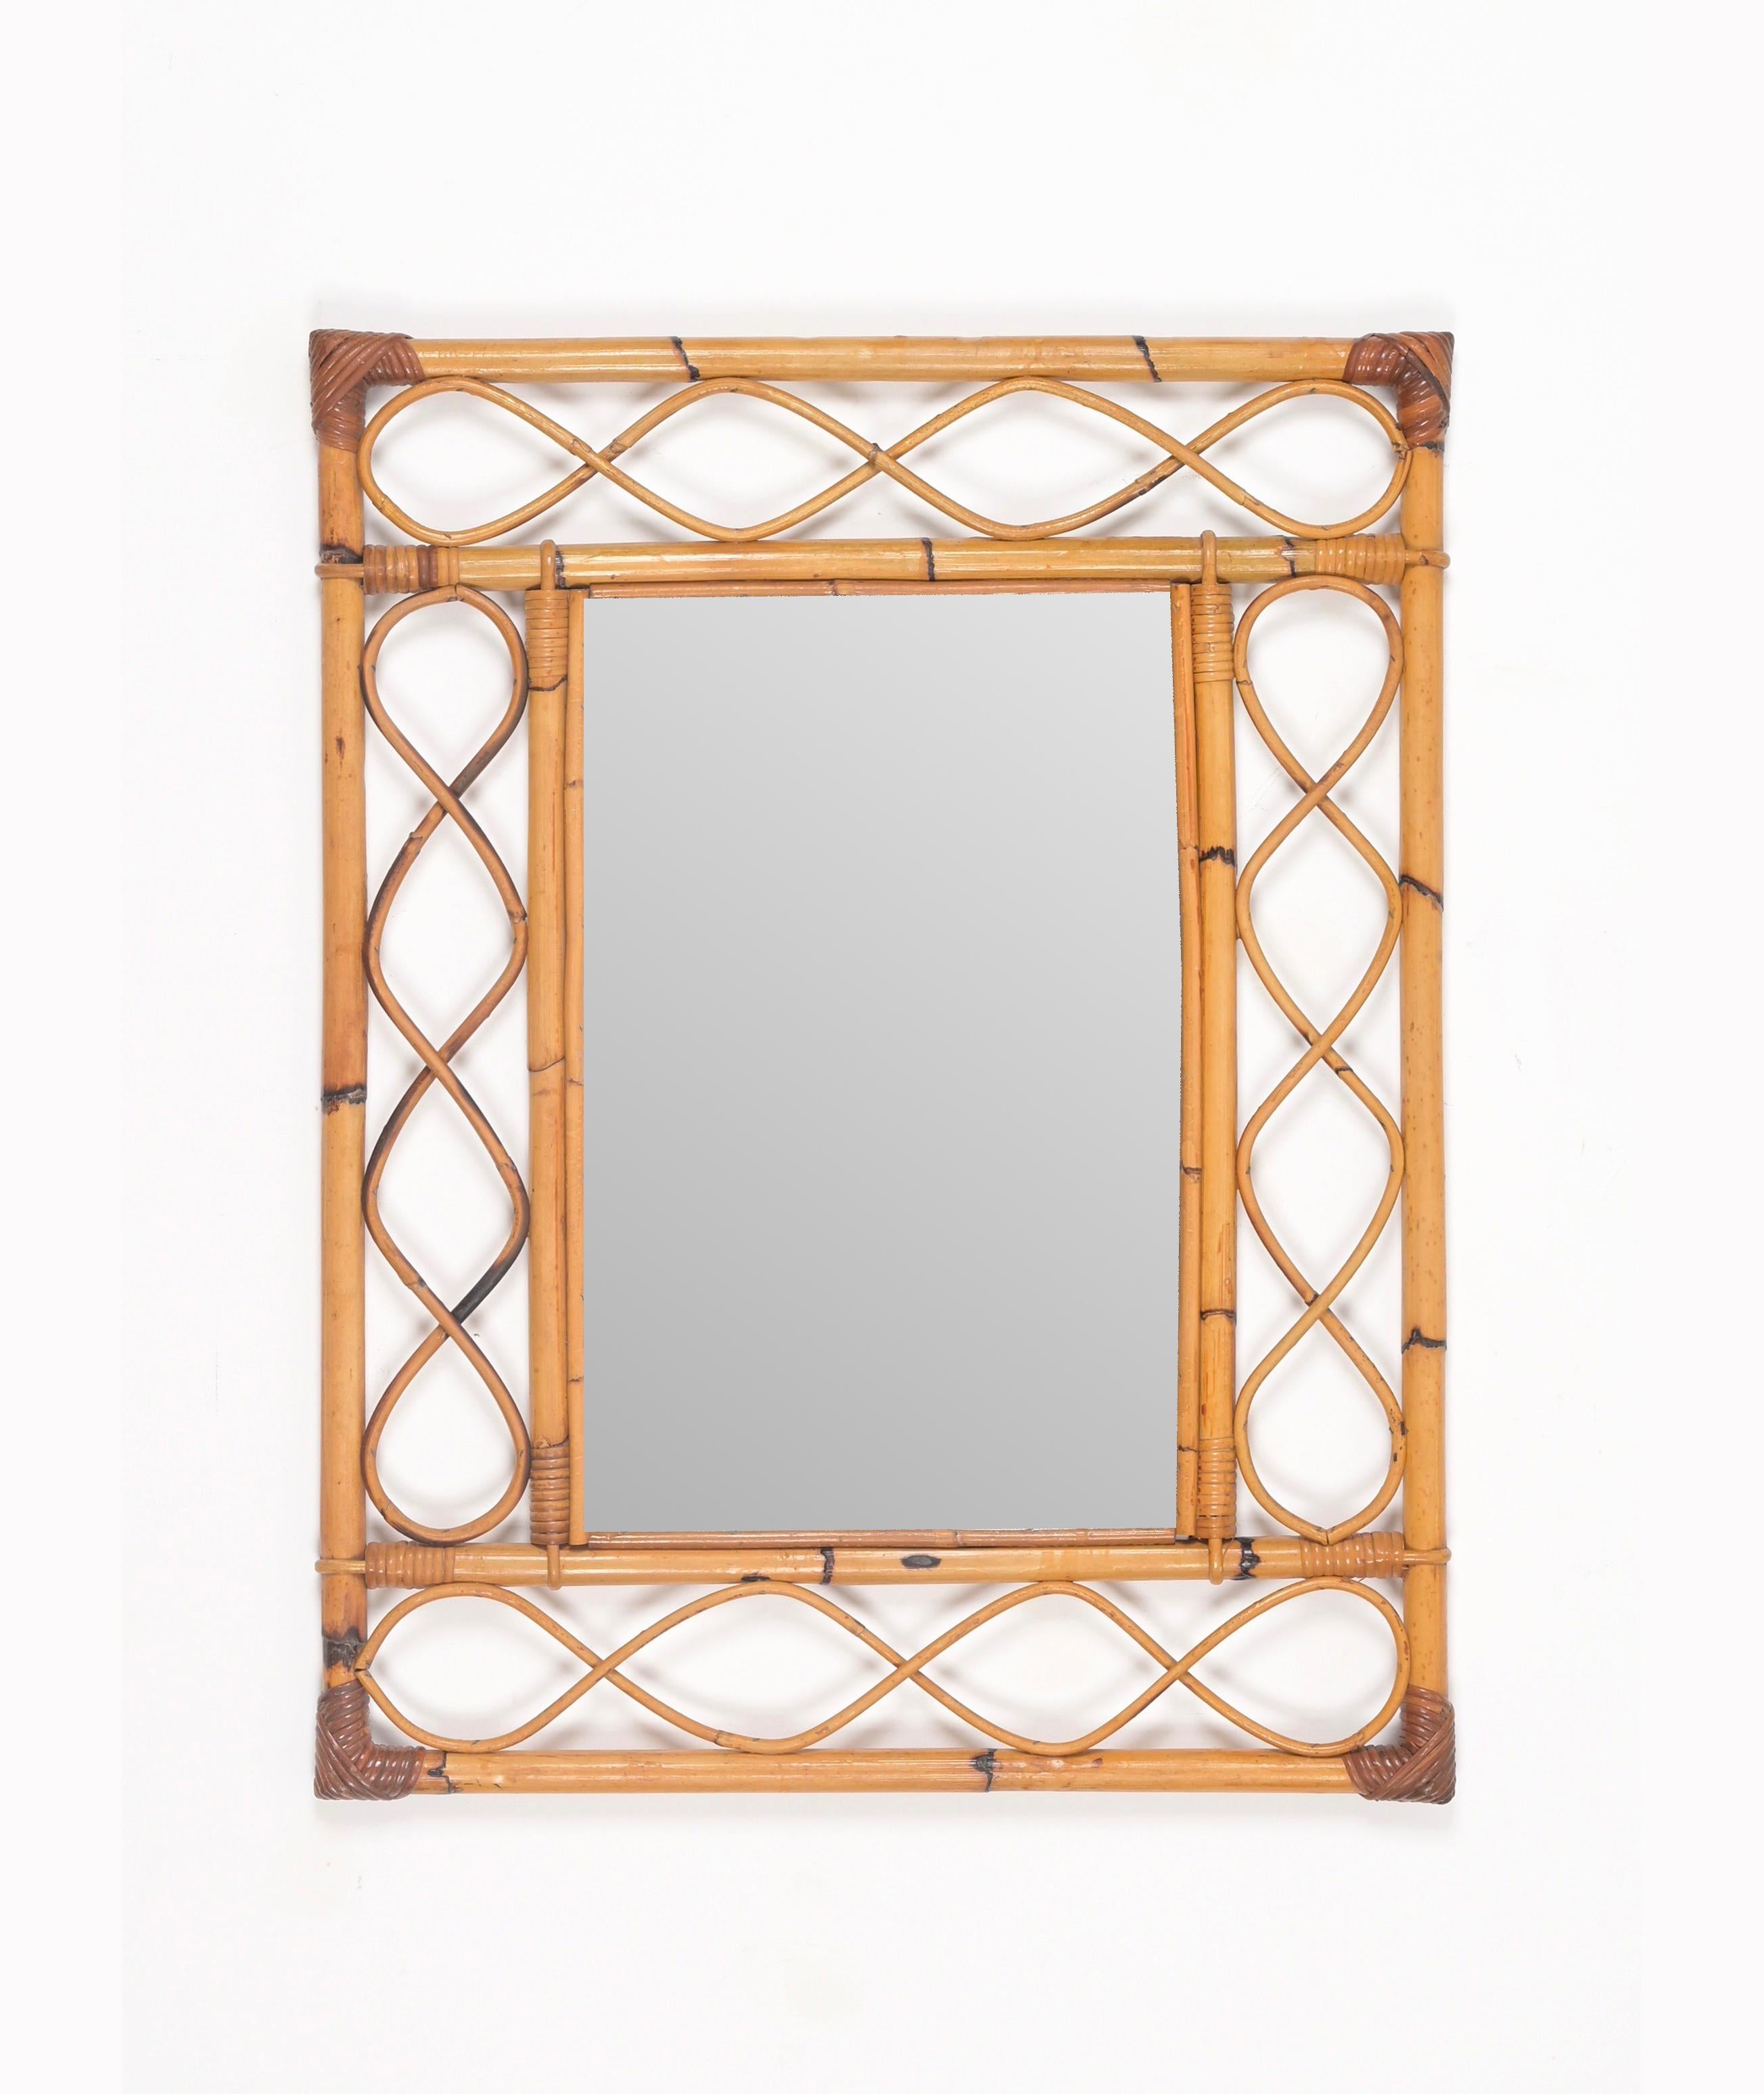 Midcentury French Riviera Bamboo, Rattan, Wicker Rectangular Mirror, Italy 1960s For Sale 1